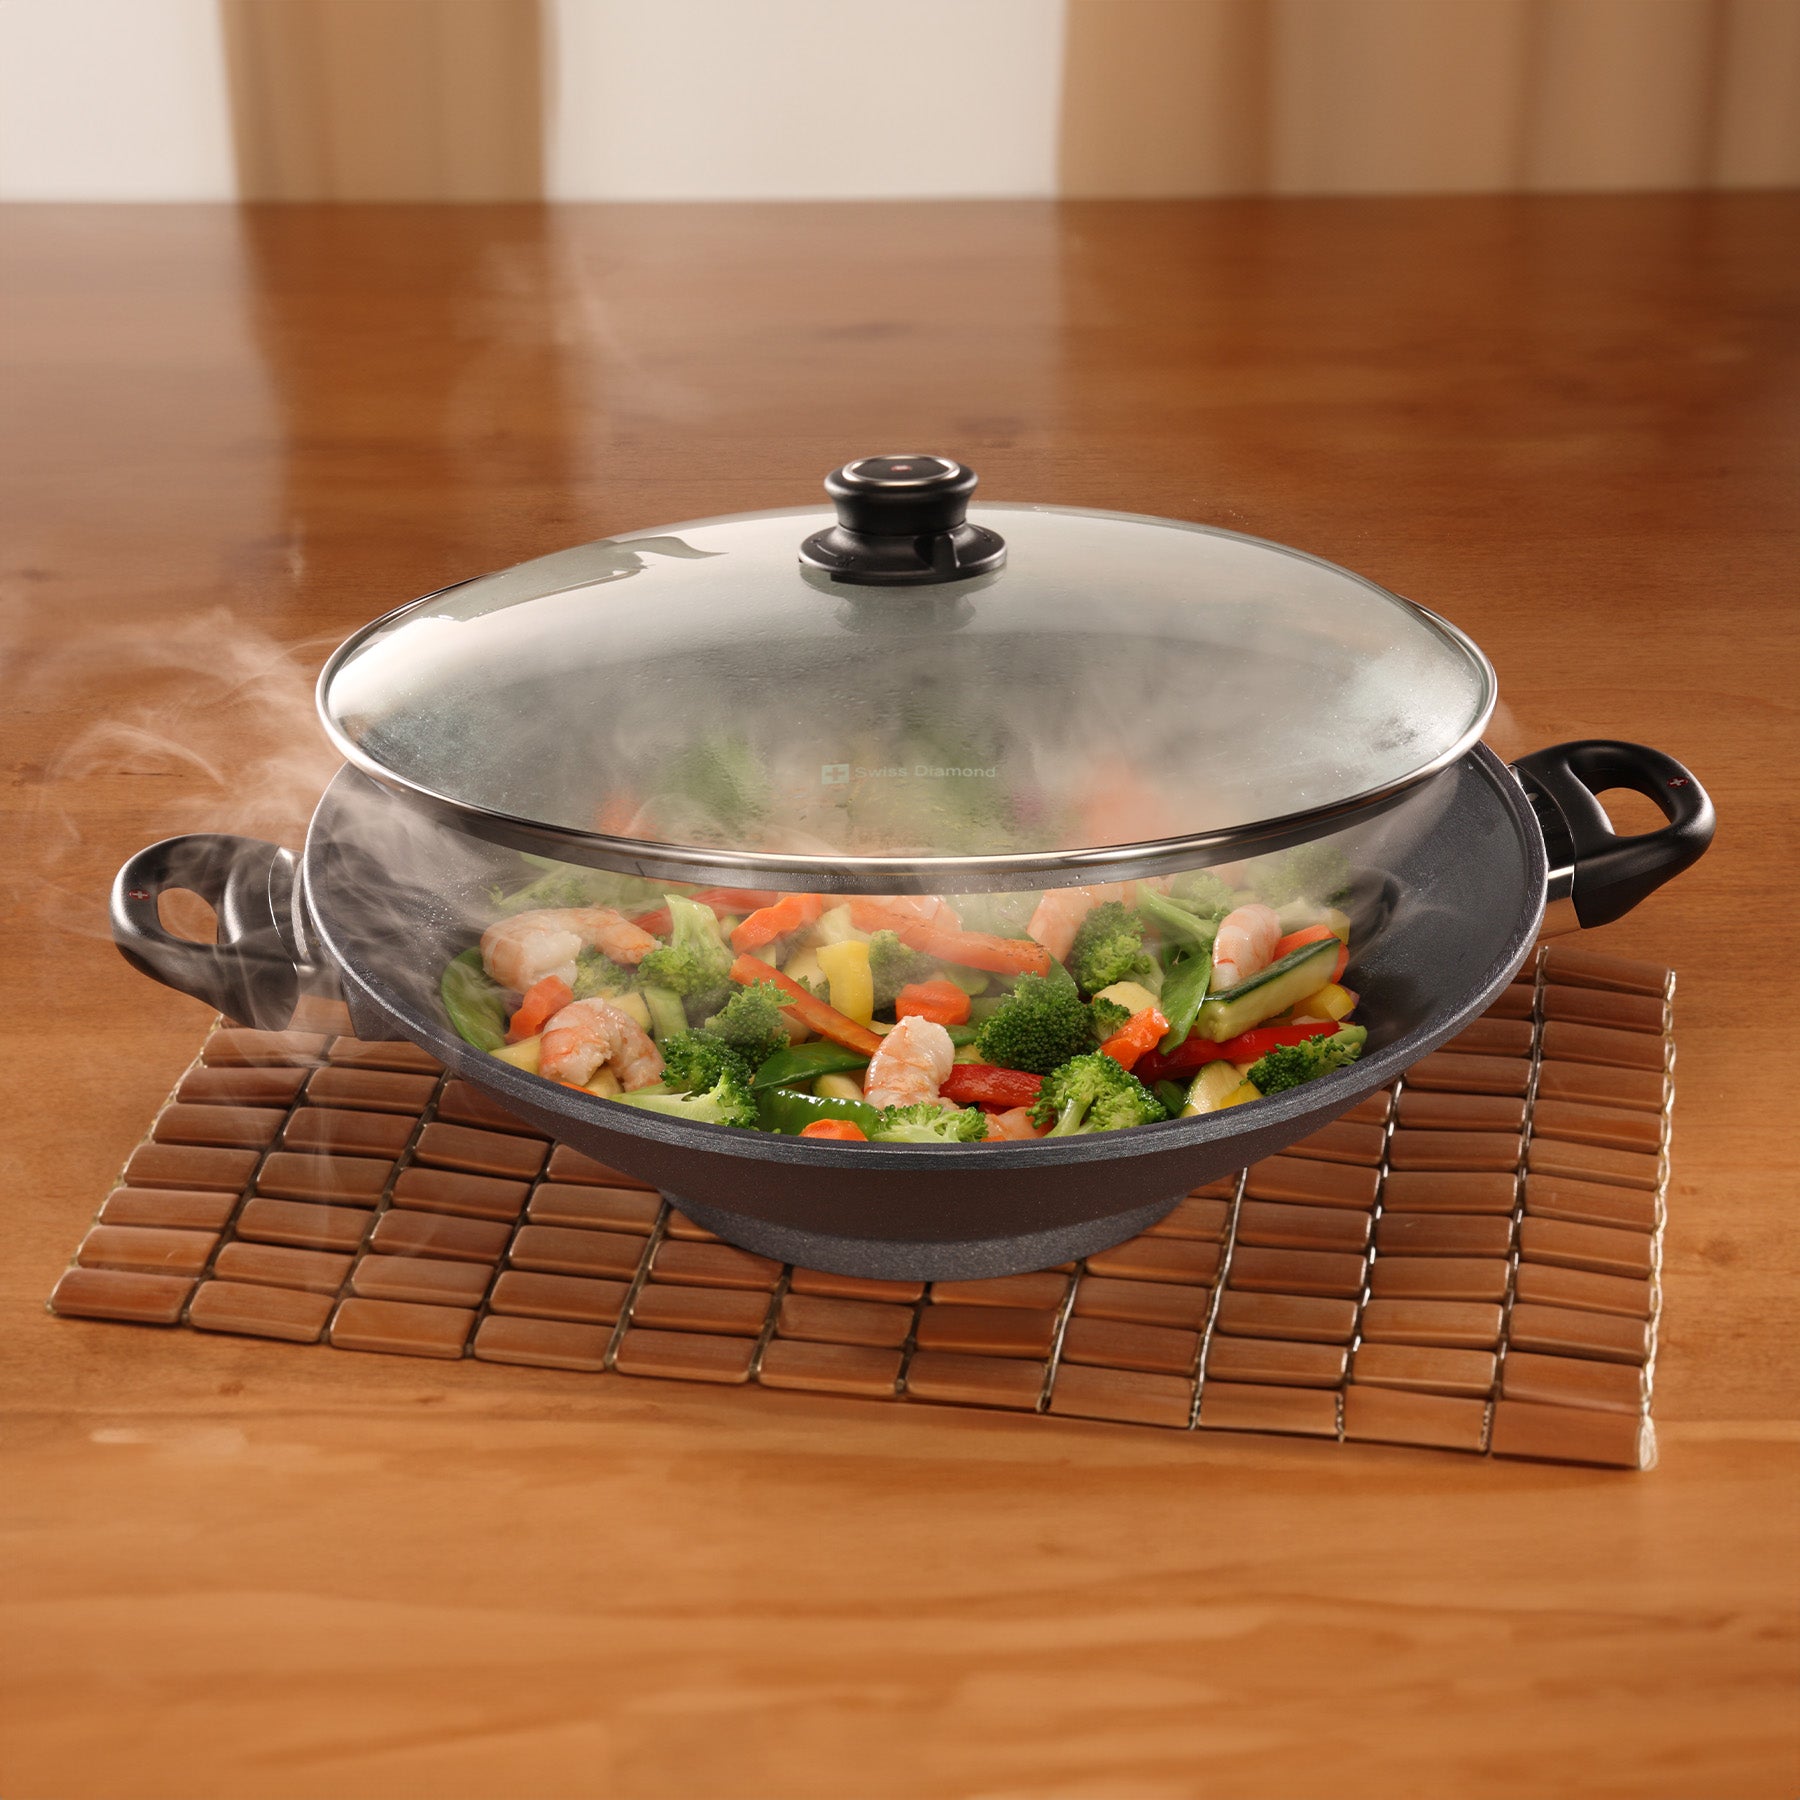 HD Nonstick Wok with Glass Lid & Rack in use on wooden table